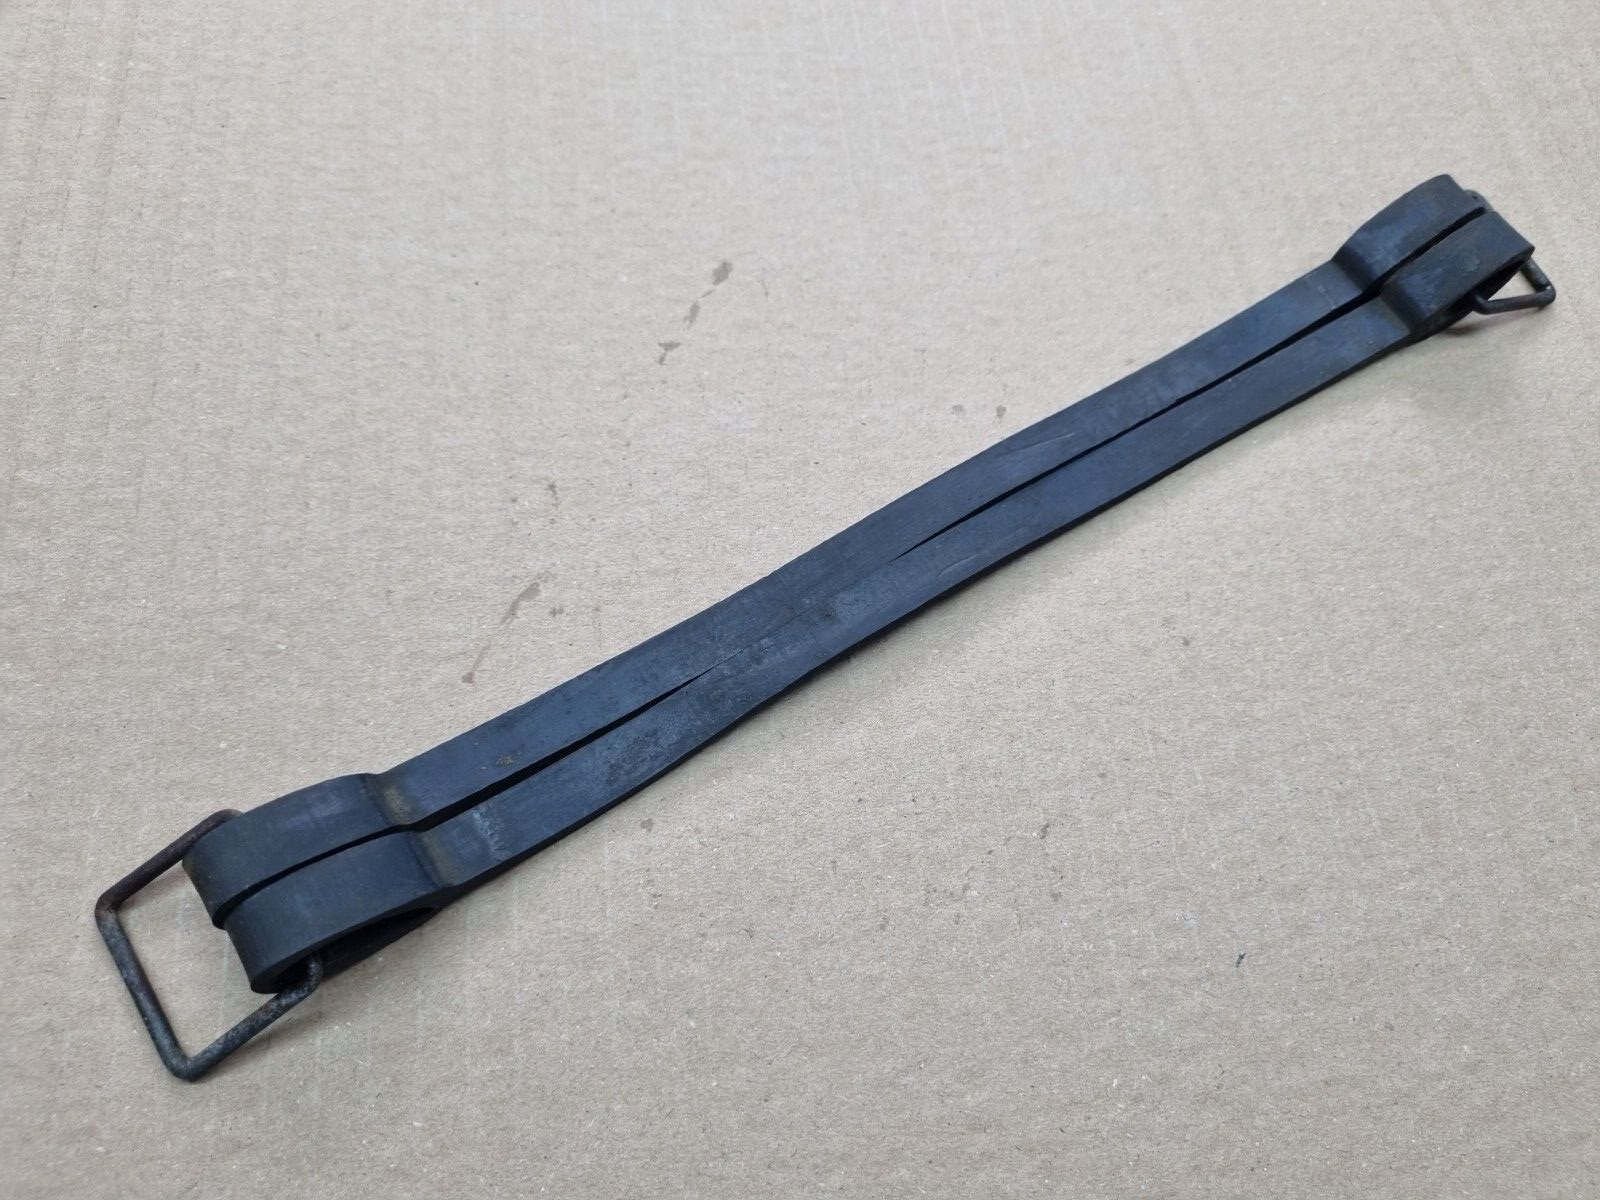 RENAULT 5 GT TURBO USED PHASE 2 HEADER COOLANT TANK RUBBER STRAP